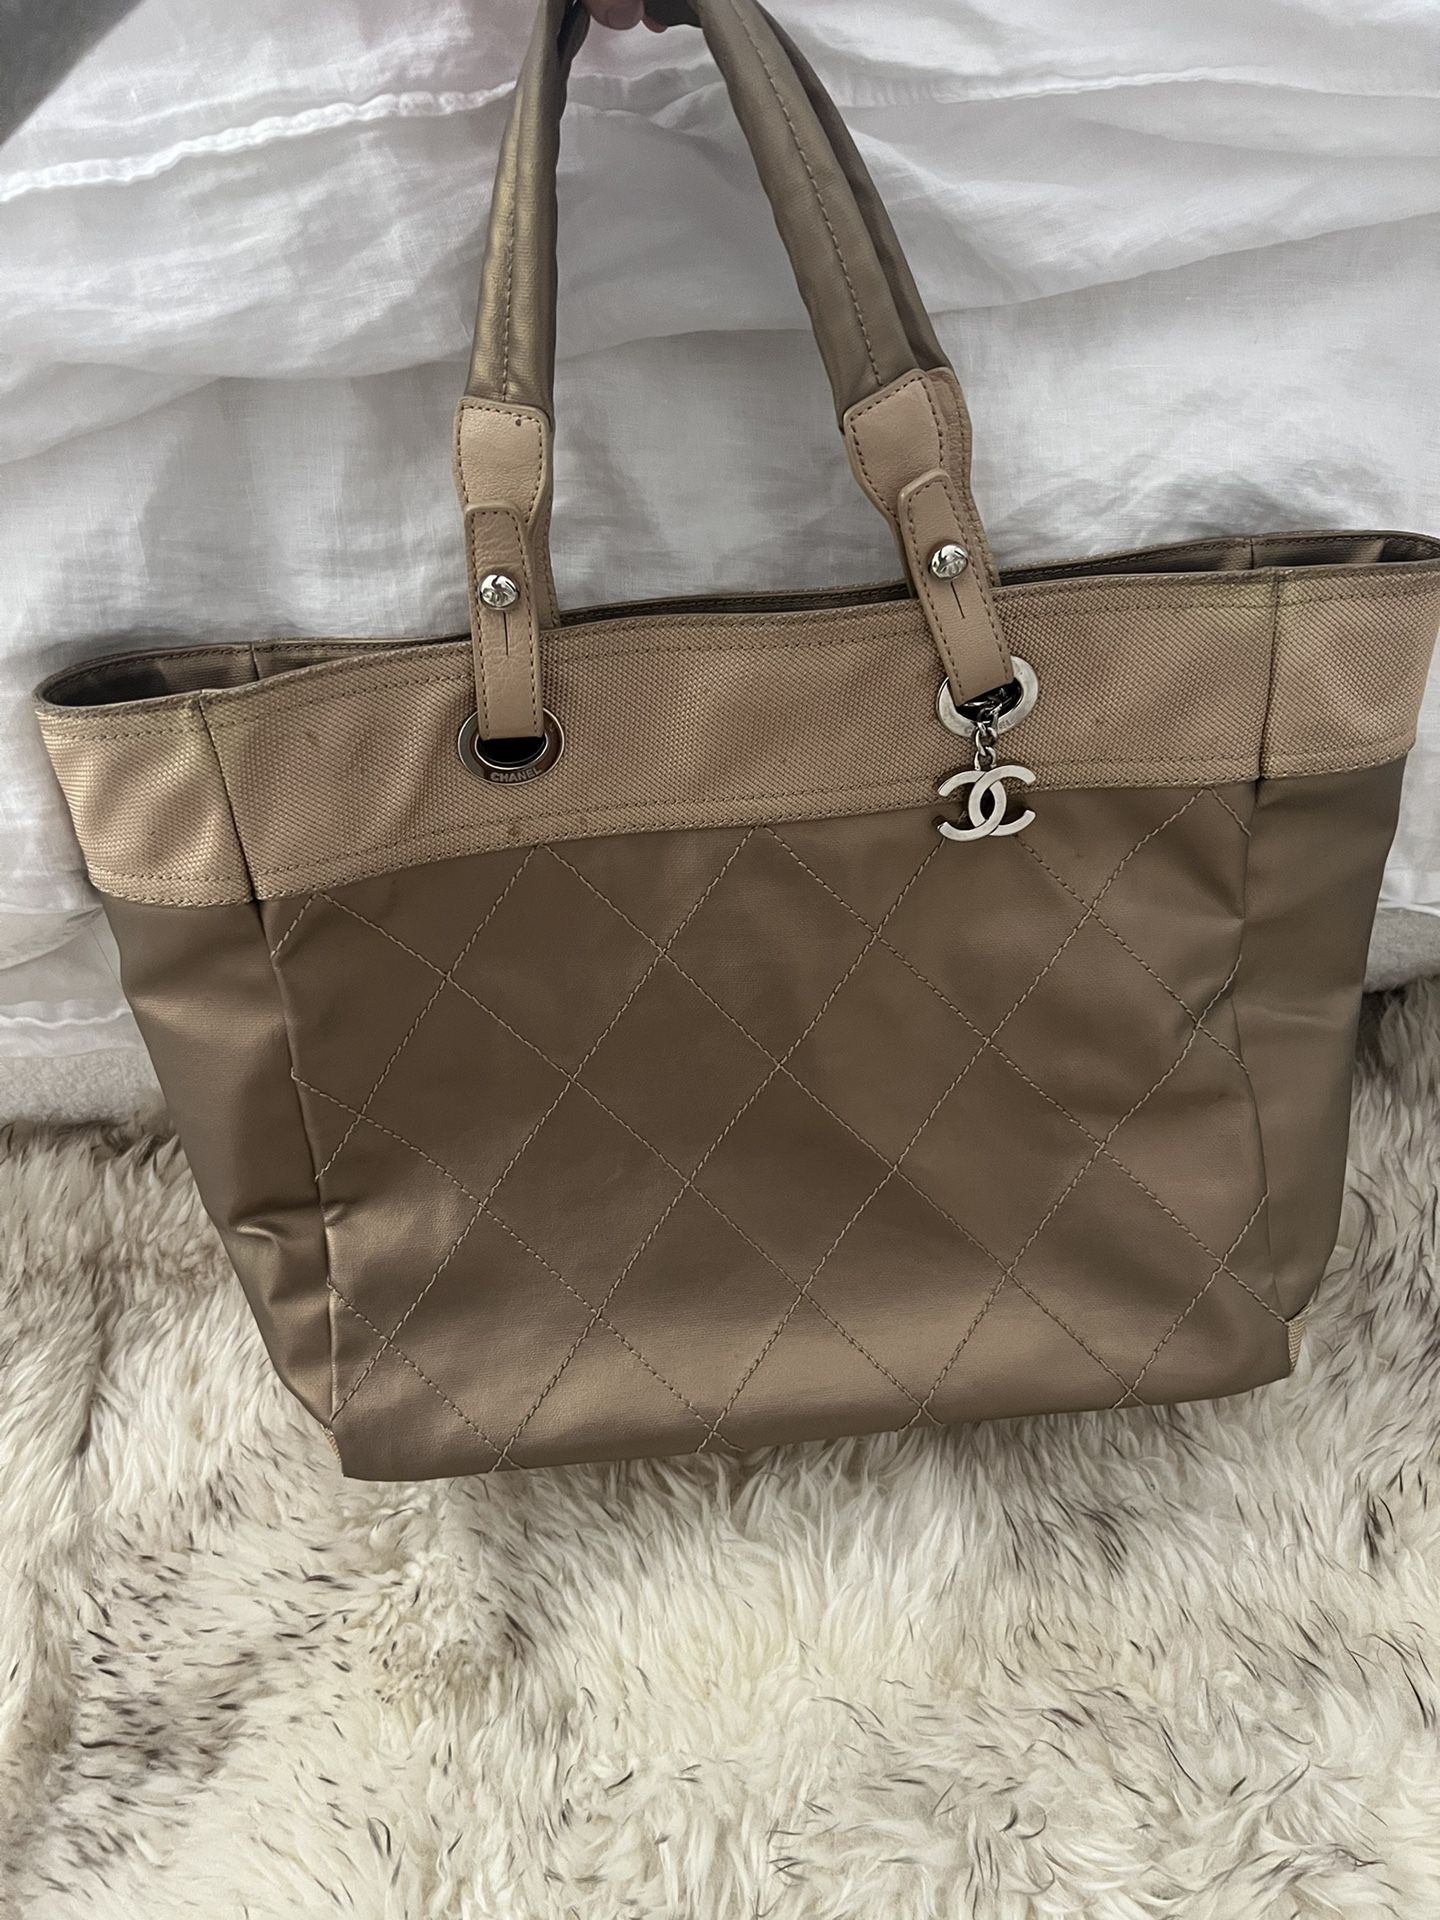 Chanel Gold Biarritz Quilted Tote Bag